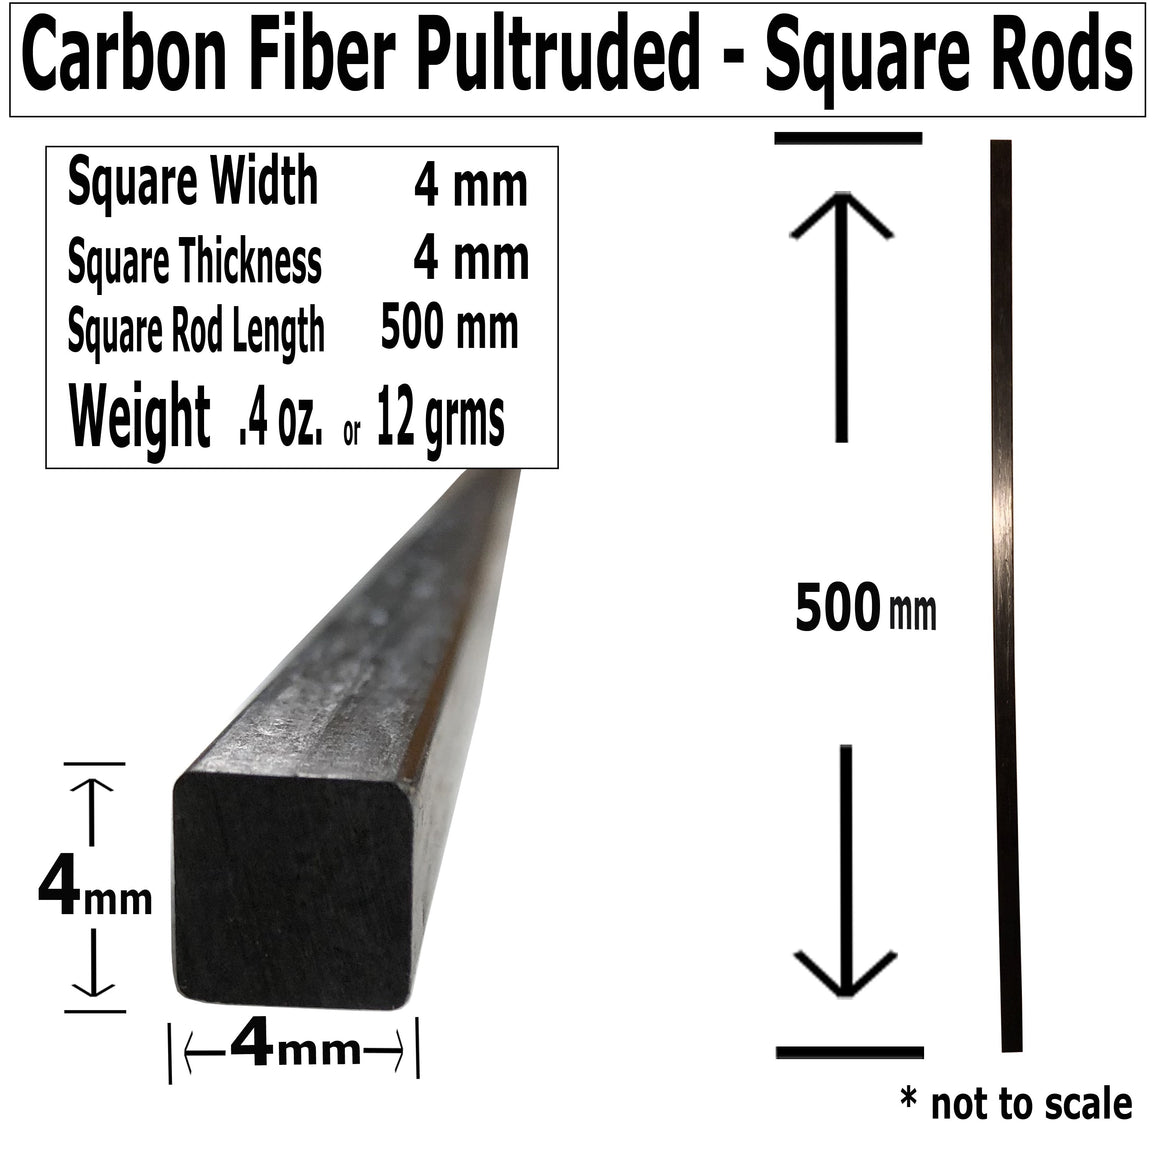 (4) 4mm X 1000mm - PULTRUDED-Square Carbon Fiber Rods. 100% Pultruded high Strength Carbon Fiber. Used for Drones, Radio Controlled Vehicles. Projects requiring high Strength to Weight Components.